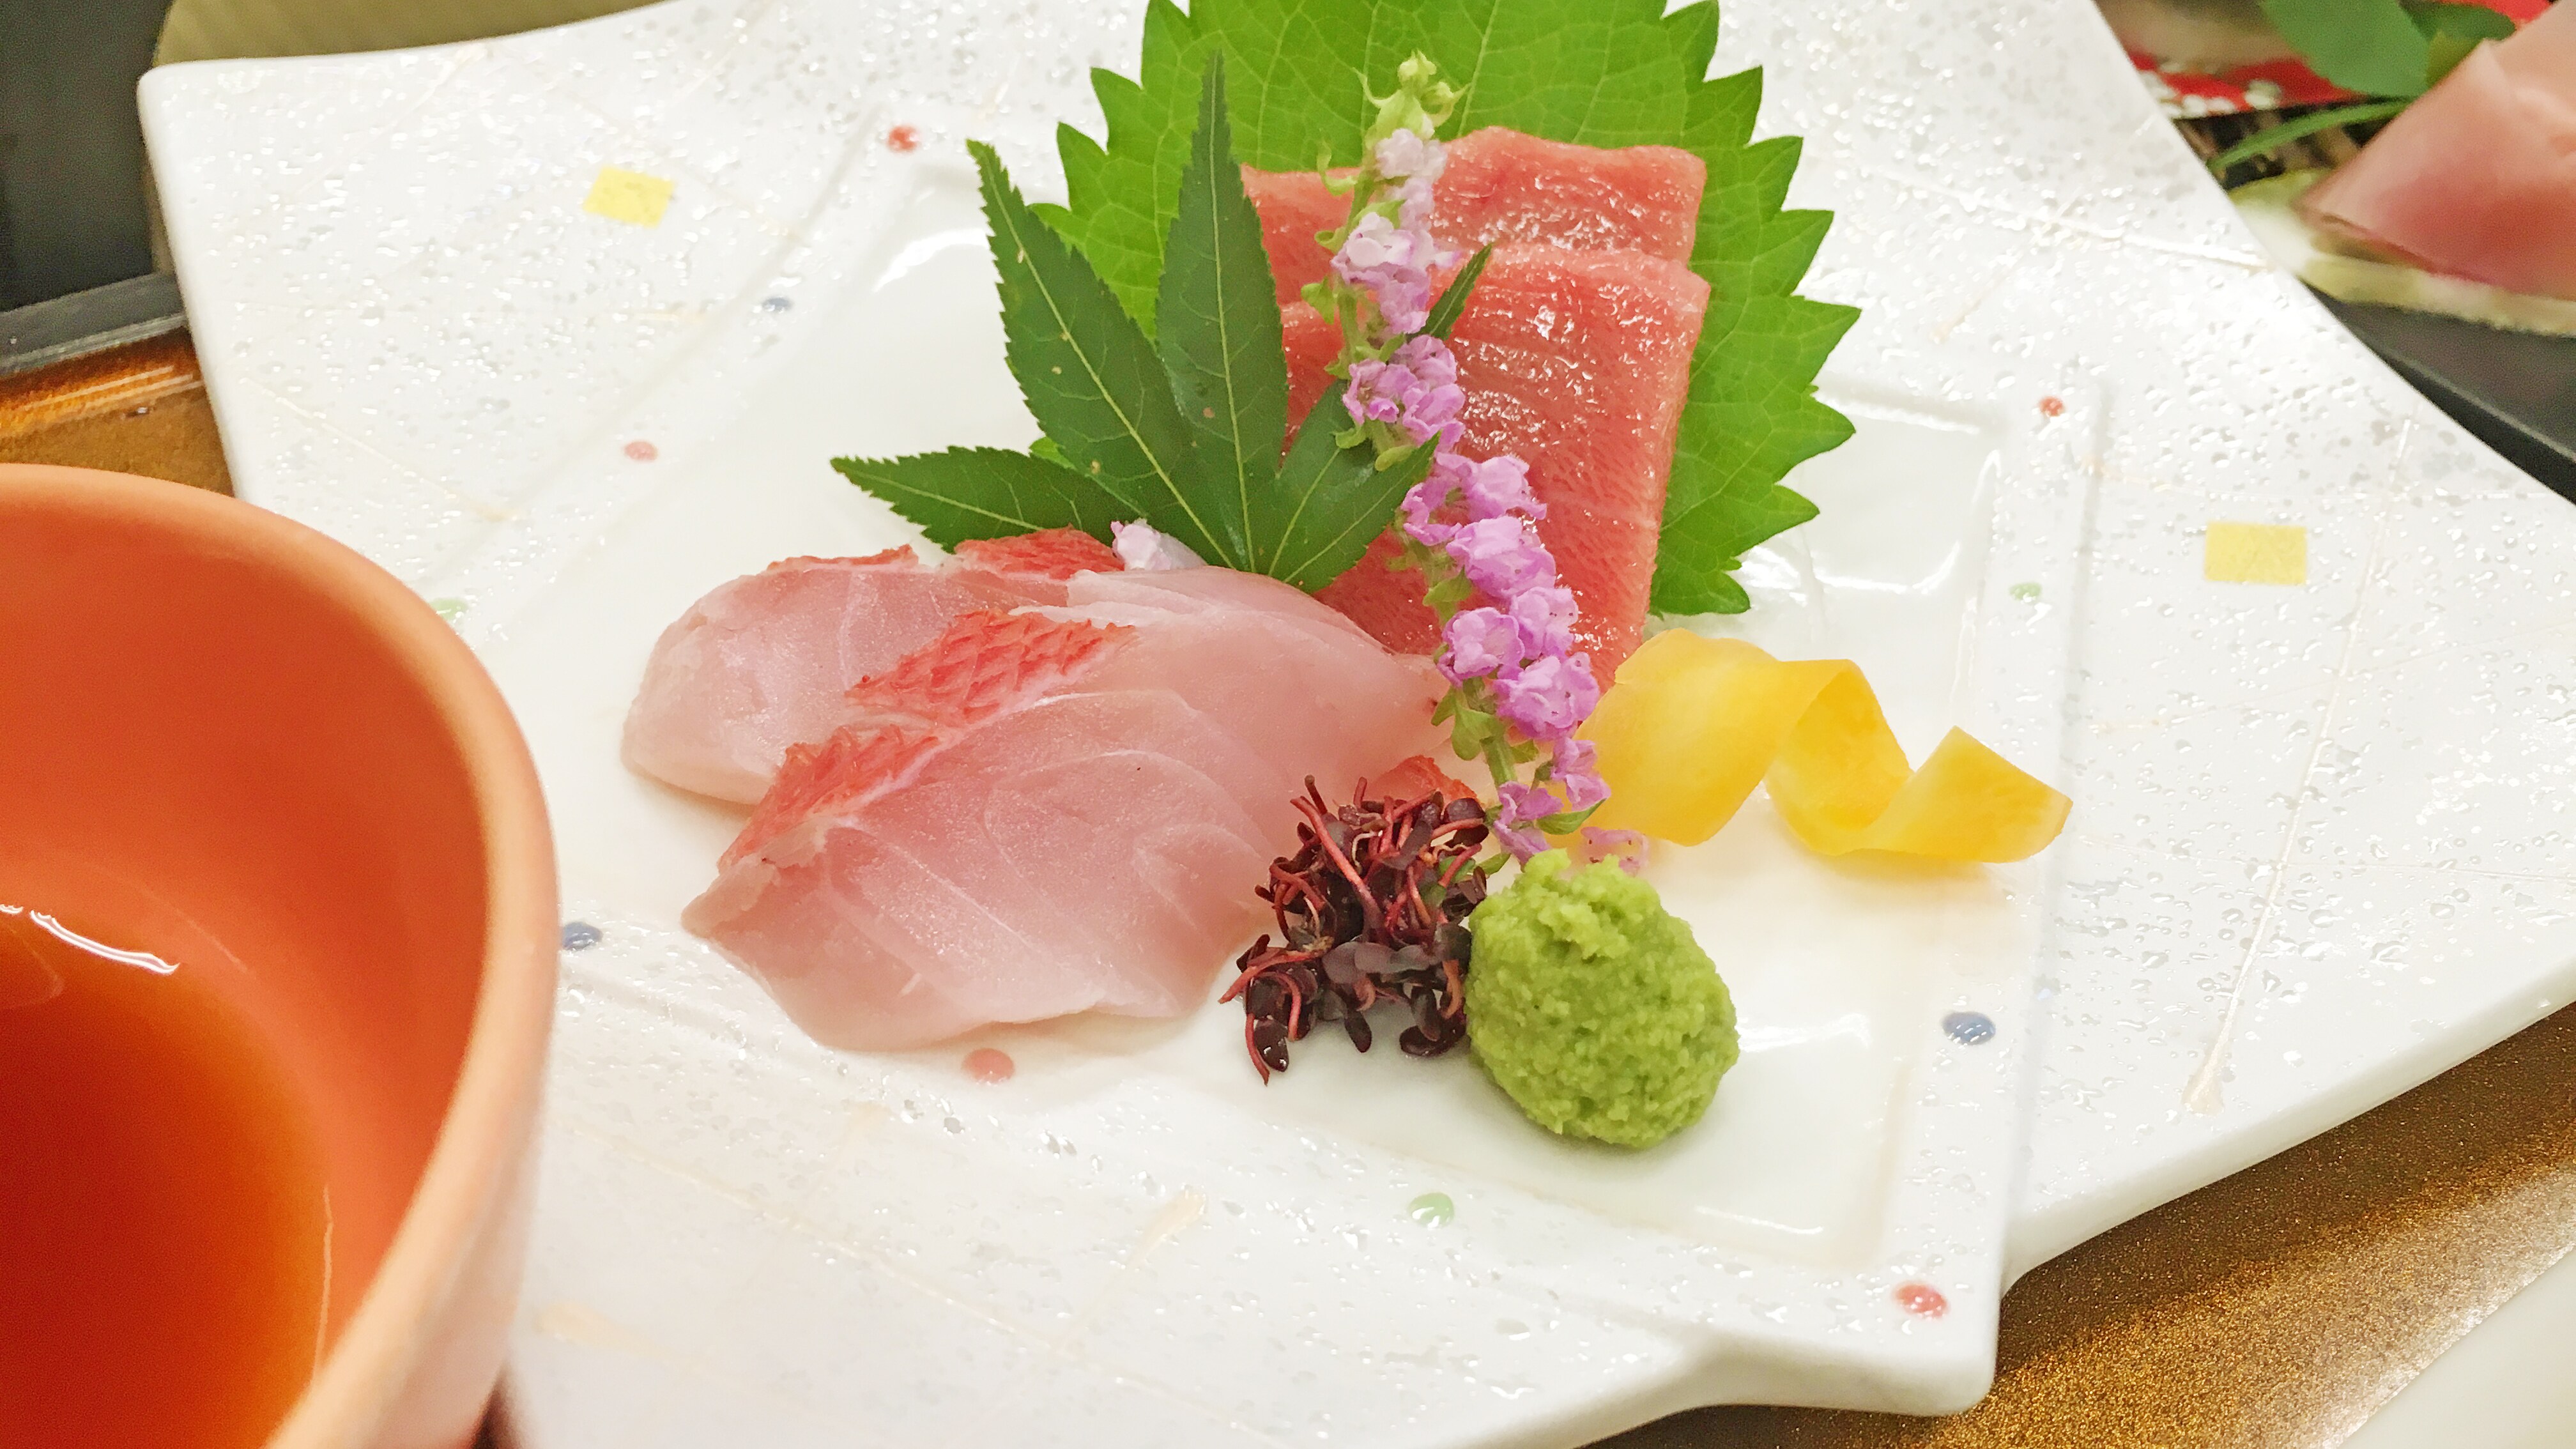 Although it is a mountain, we offer sashimi carefully selected by the chef.